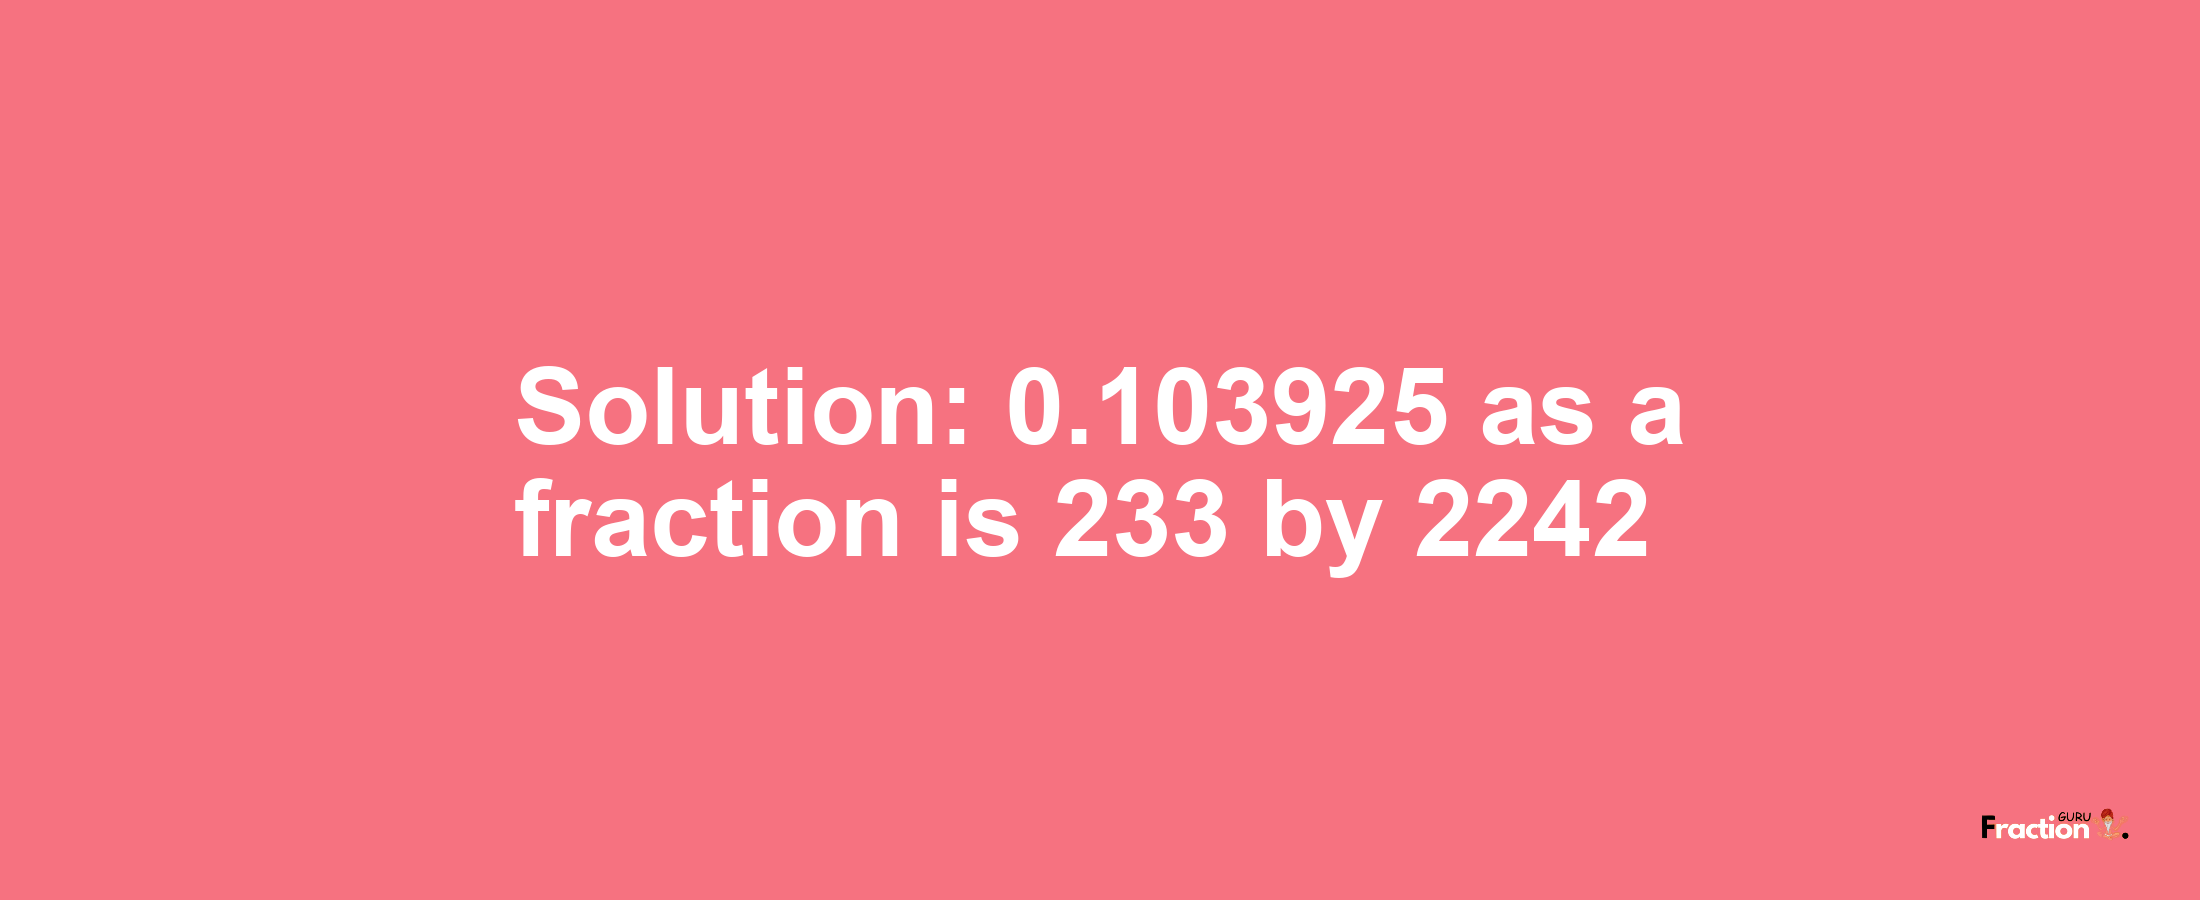 Solution:0.103925 as a fraction is 233/2242